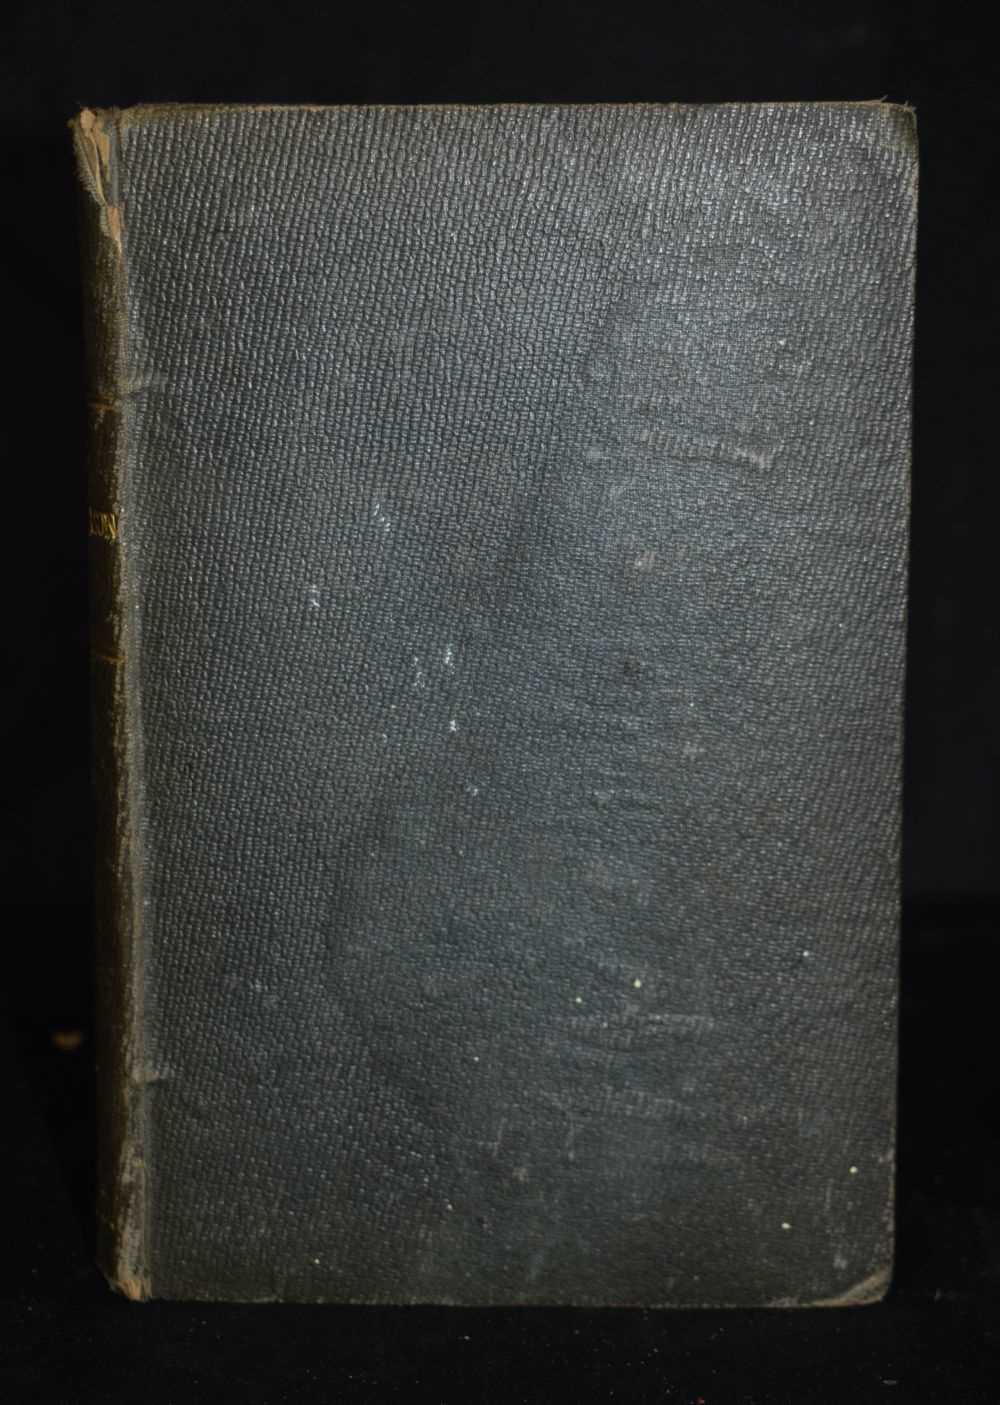 Book by James Harrison " Life of Lord Nelson " 1806 Volume 1, 3 x 21 x 15 cm - Image 3 of 6